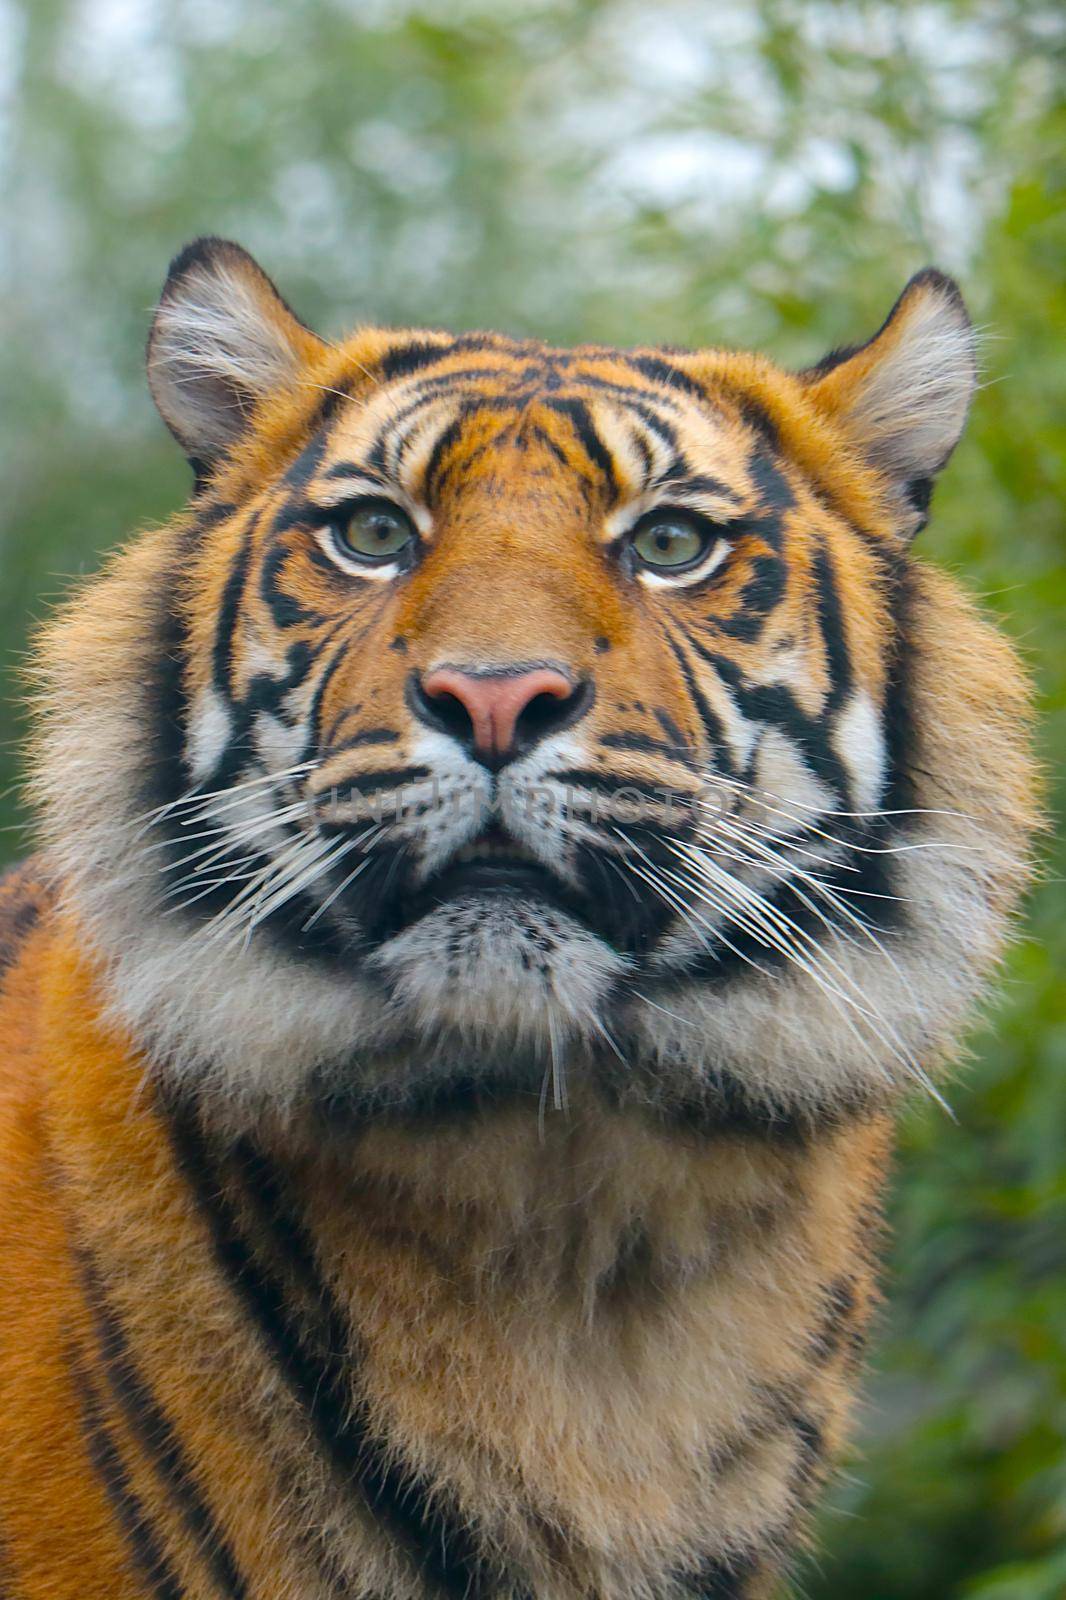 Portrait of a beautiful tiger in the wild. A predatory cat. by kip02kas